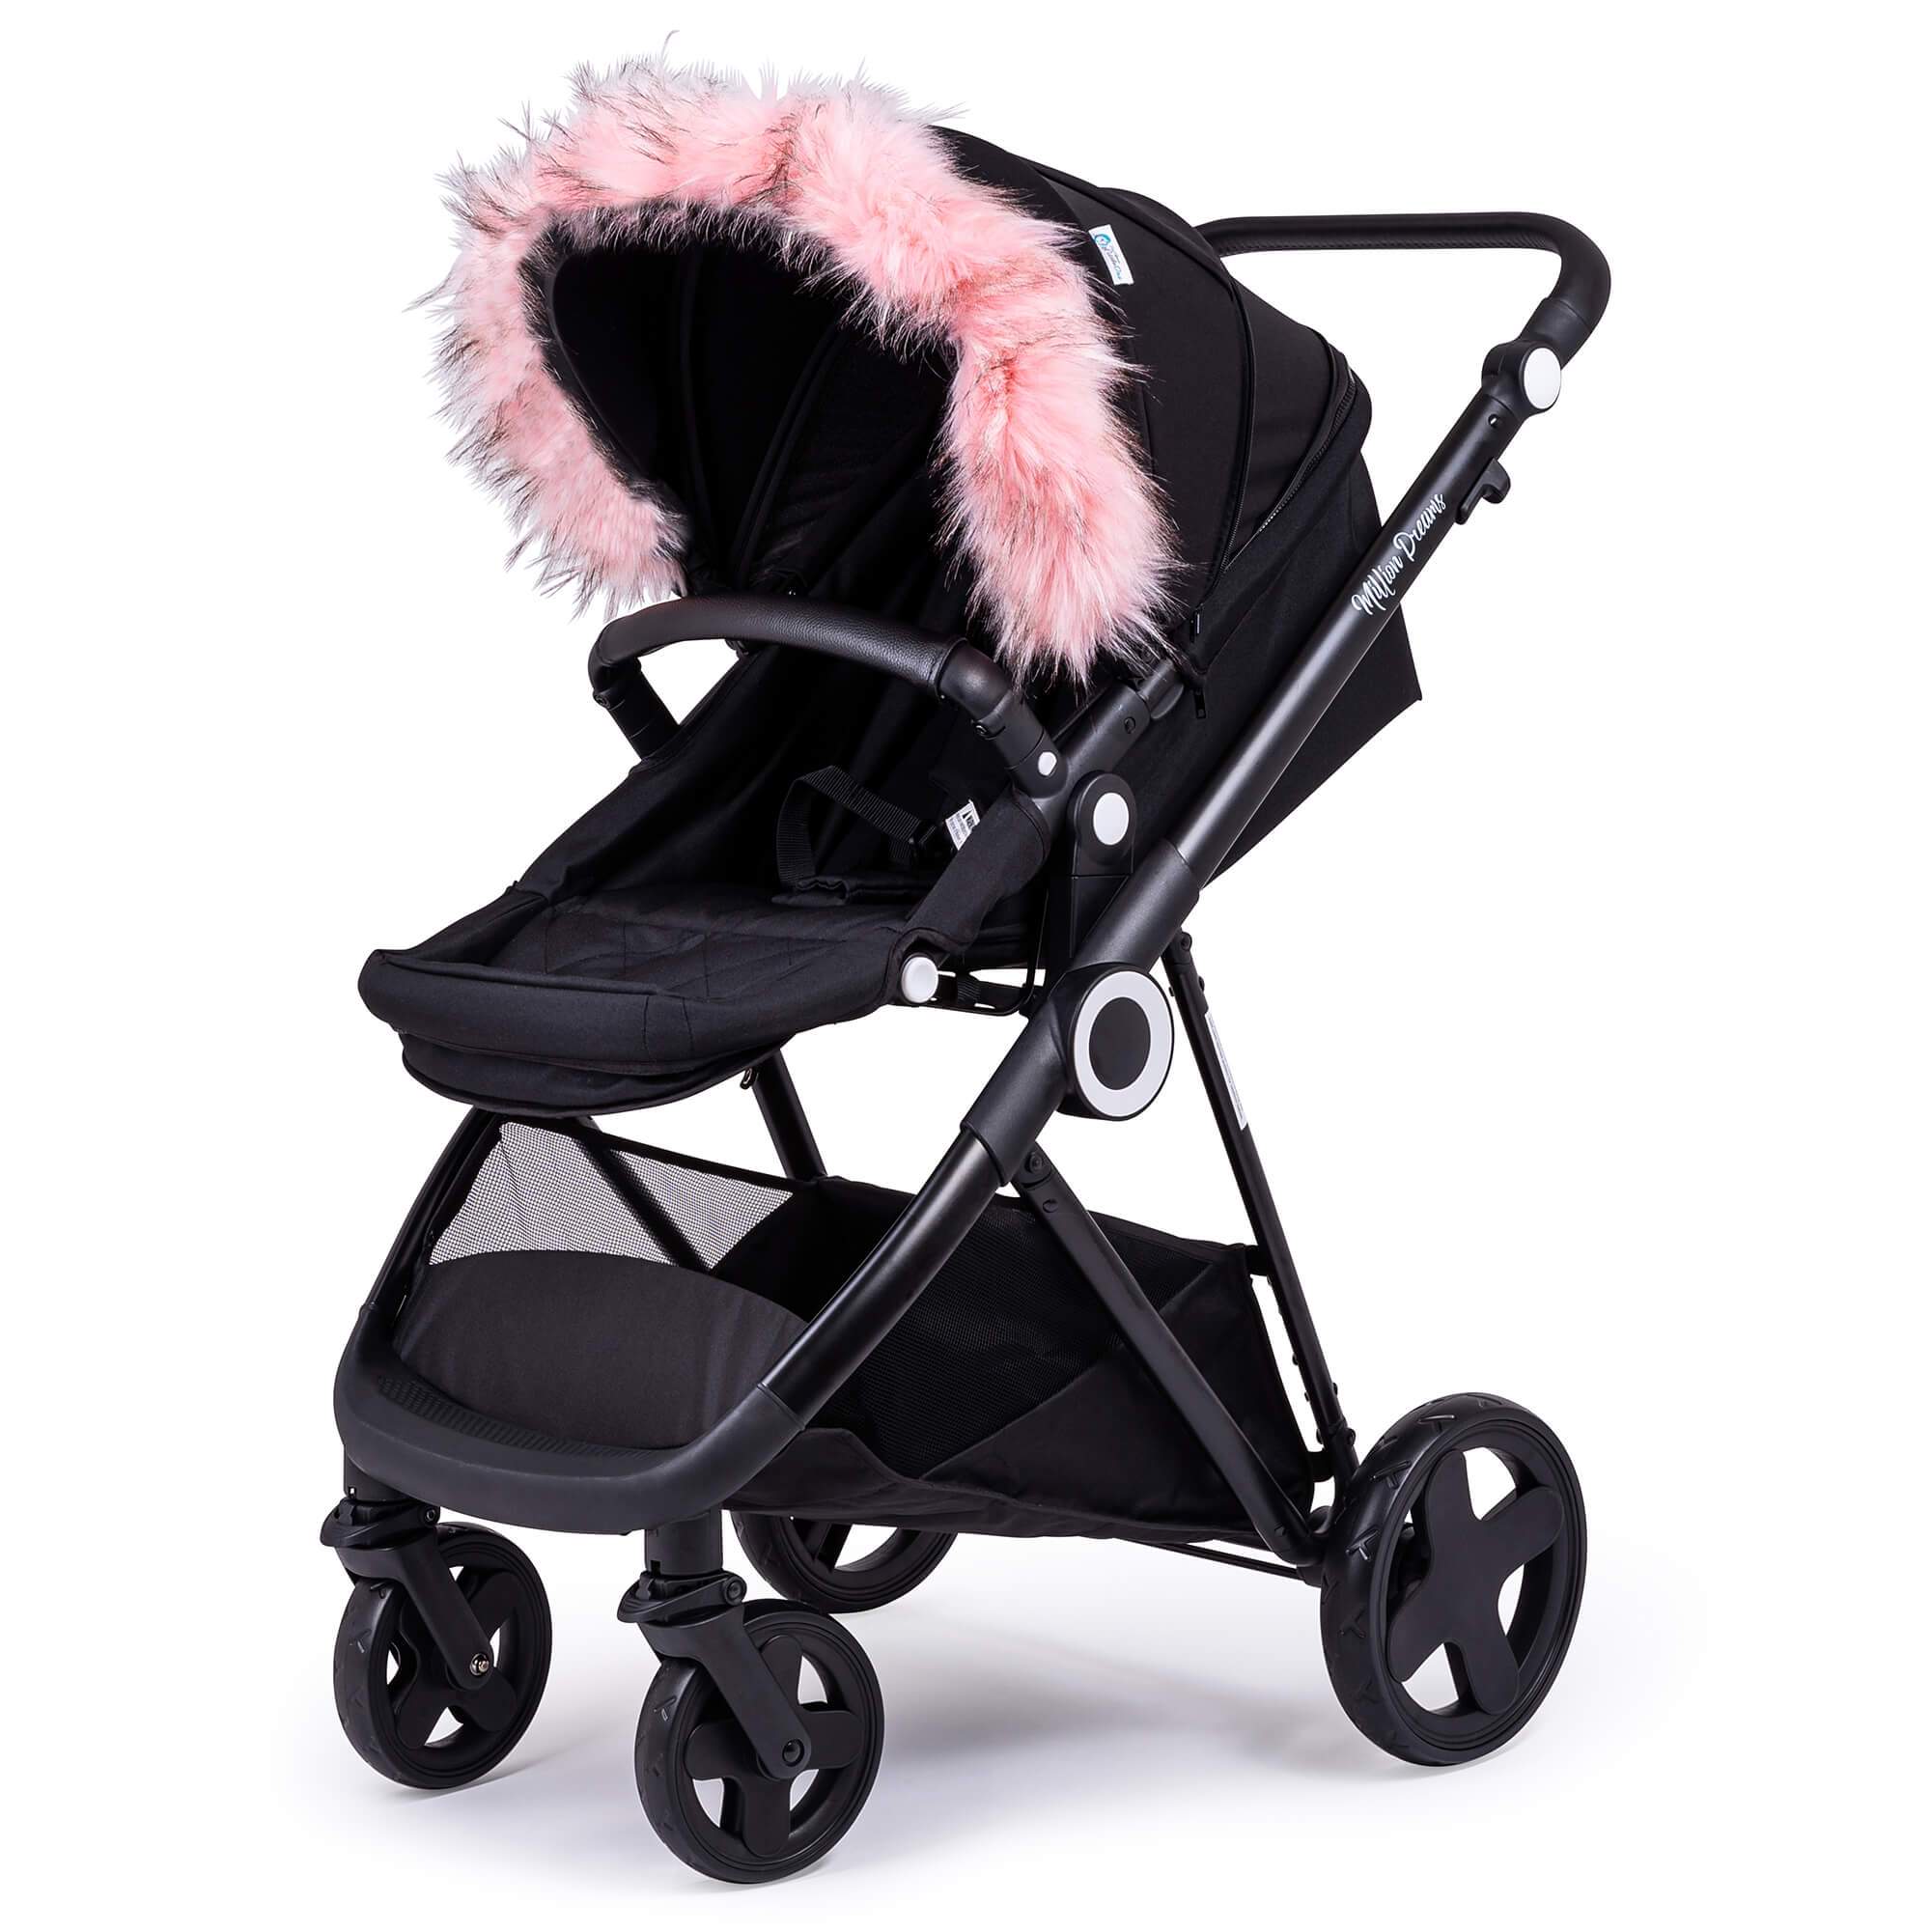 Pram Fur Hood Trim Attachment for Pushchair Compatible with Cybex - Light Pink / Fits All Models | For Your Little One